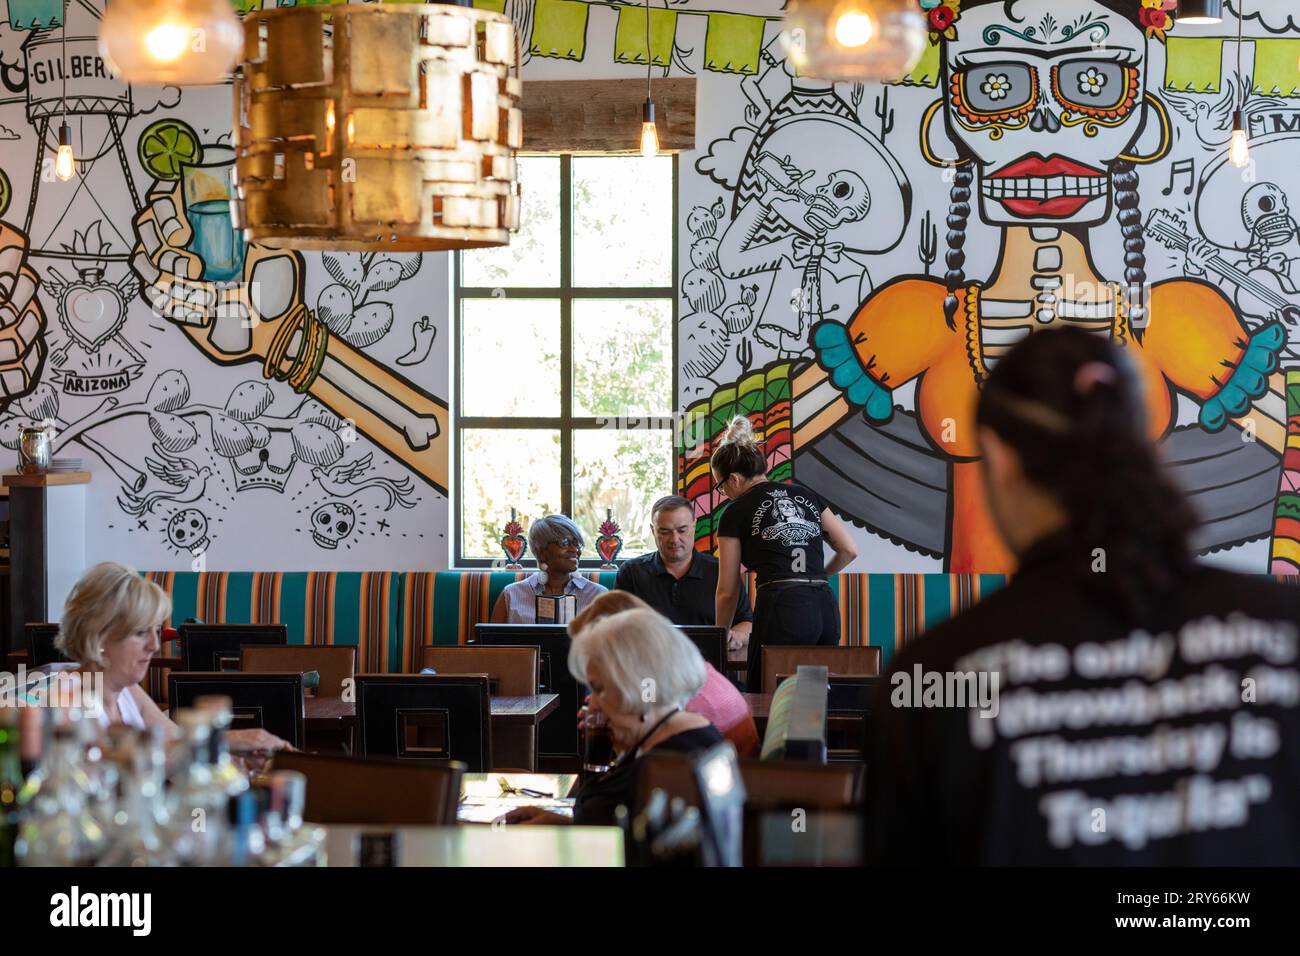 Interior of colorful Mexican restaurant wall mural Stock Photo